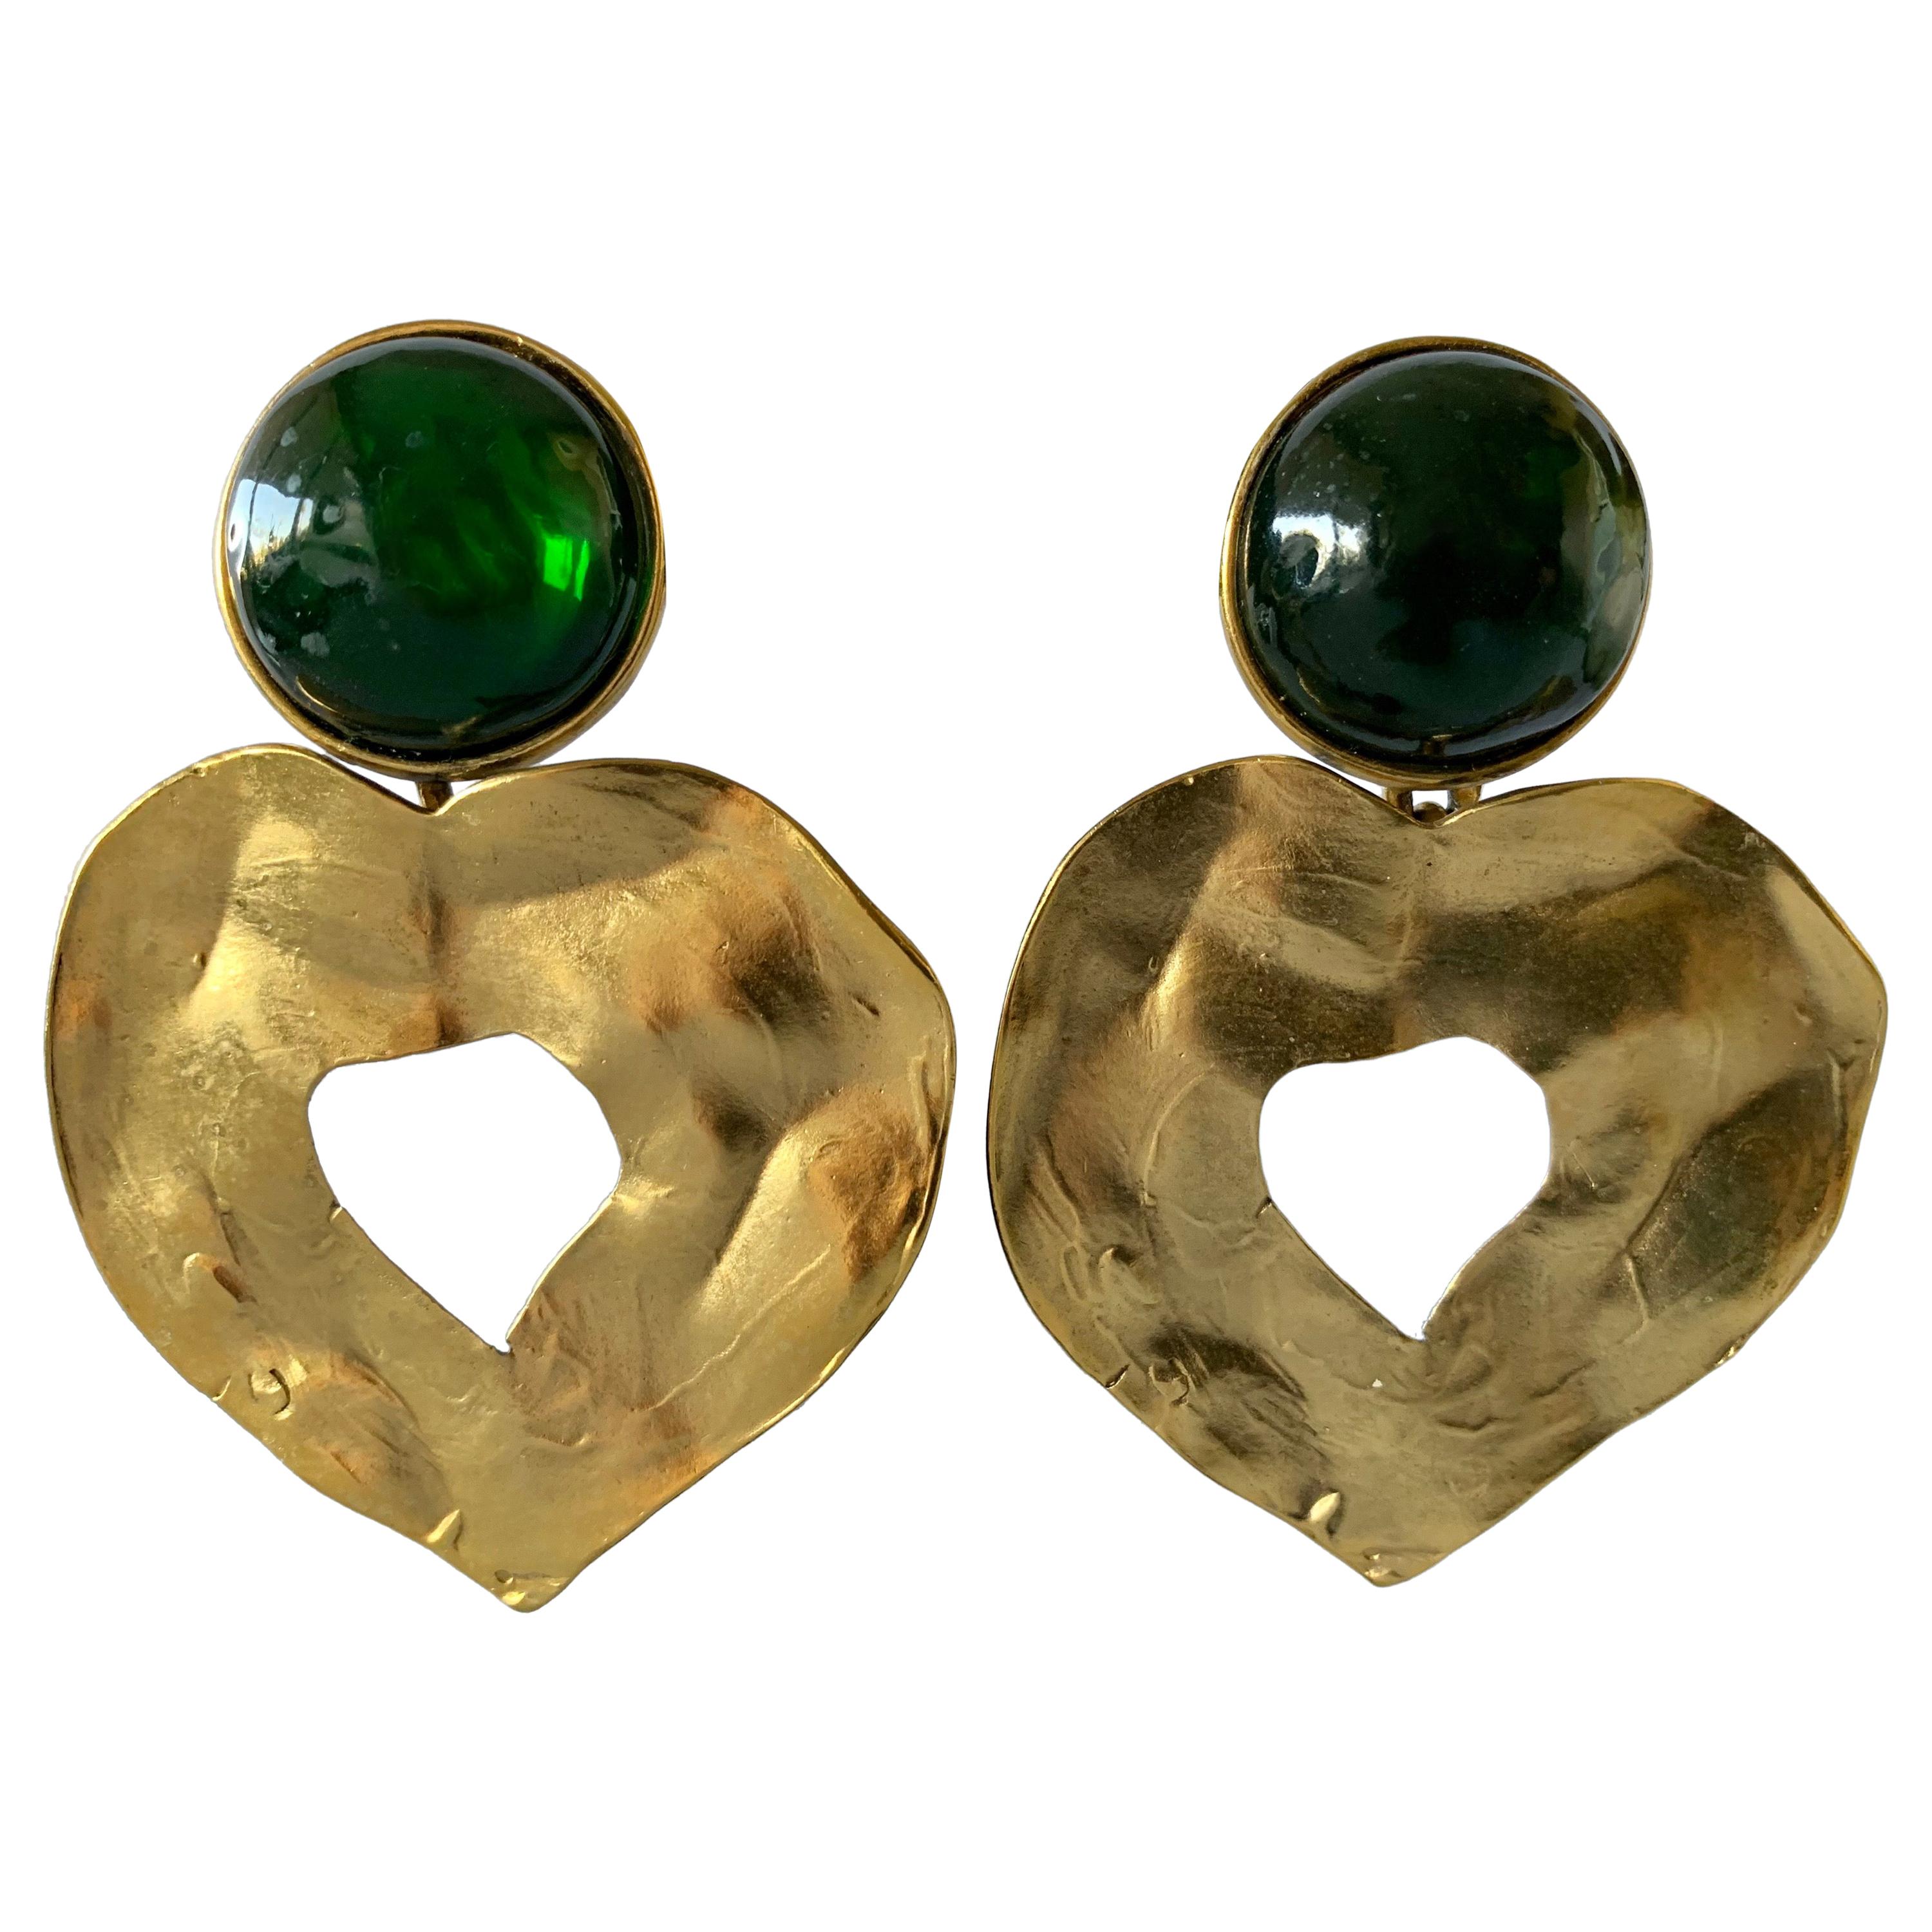 Vintage Yves Saint Laurent Green and Gold Heart Statement Earrings 